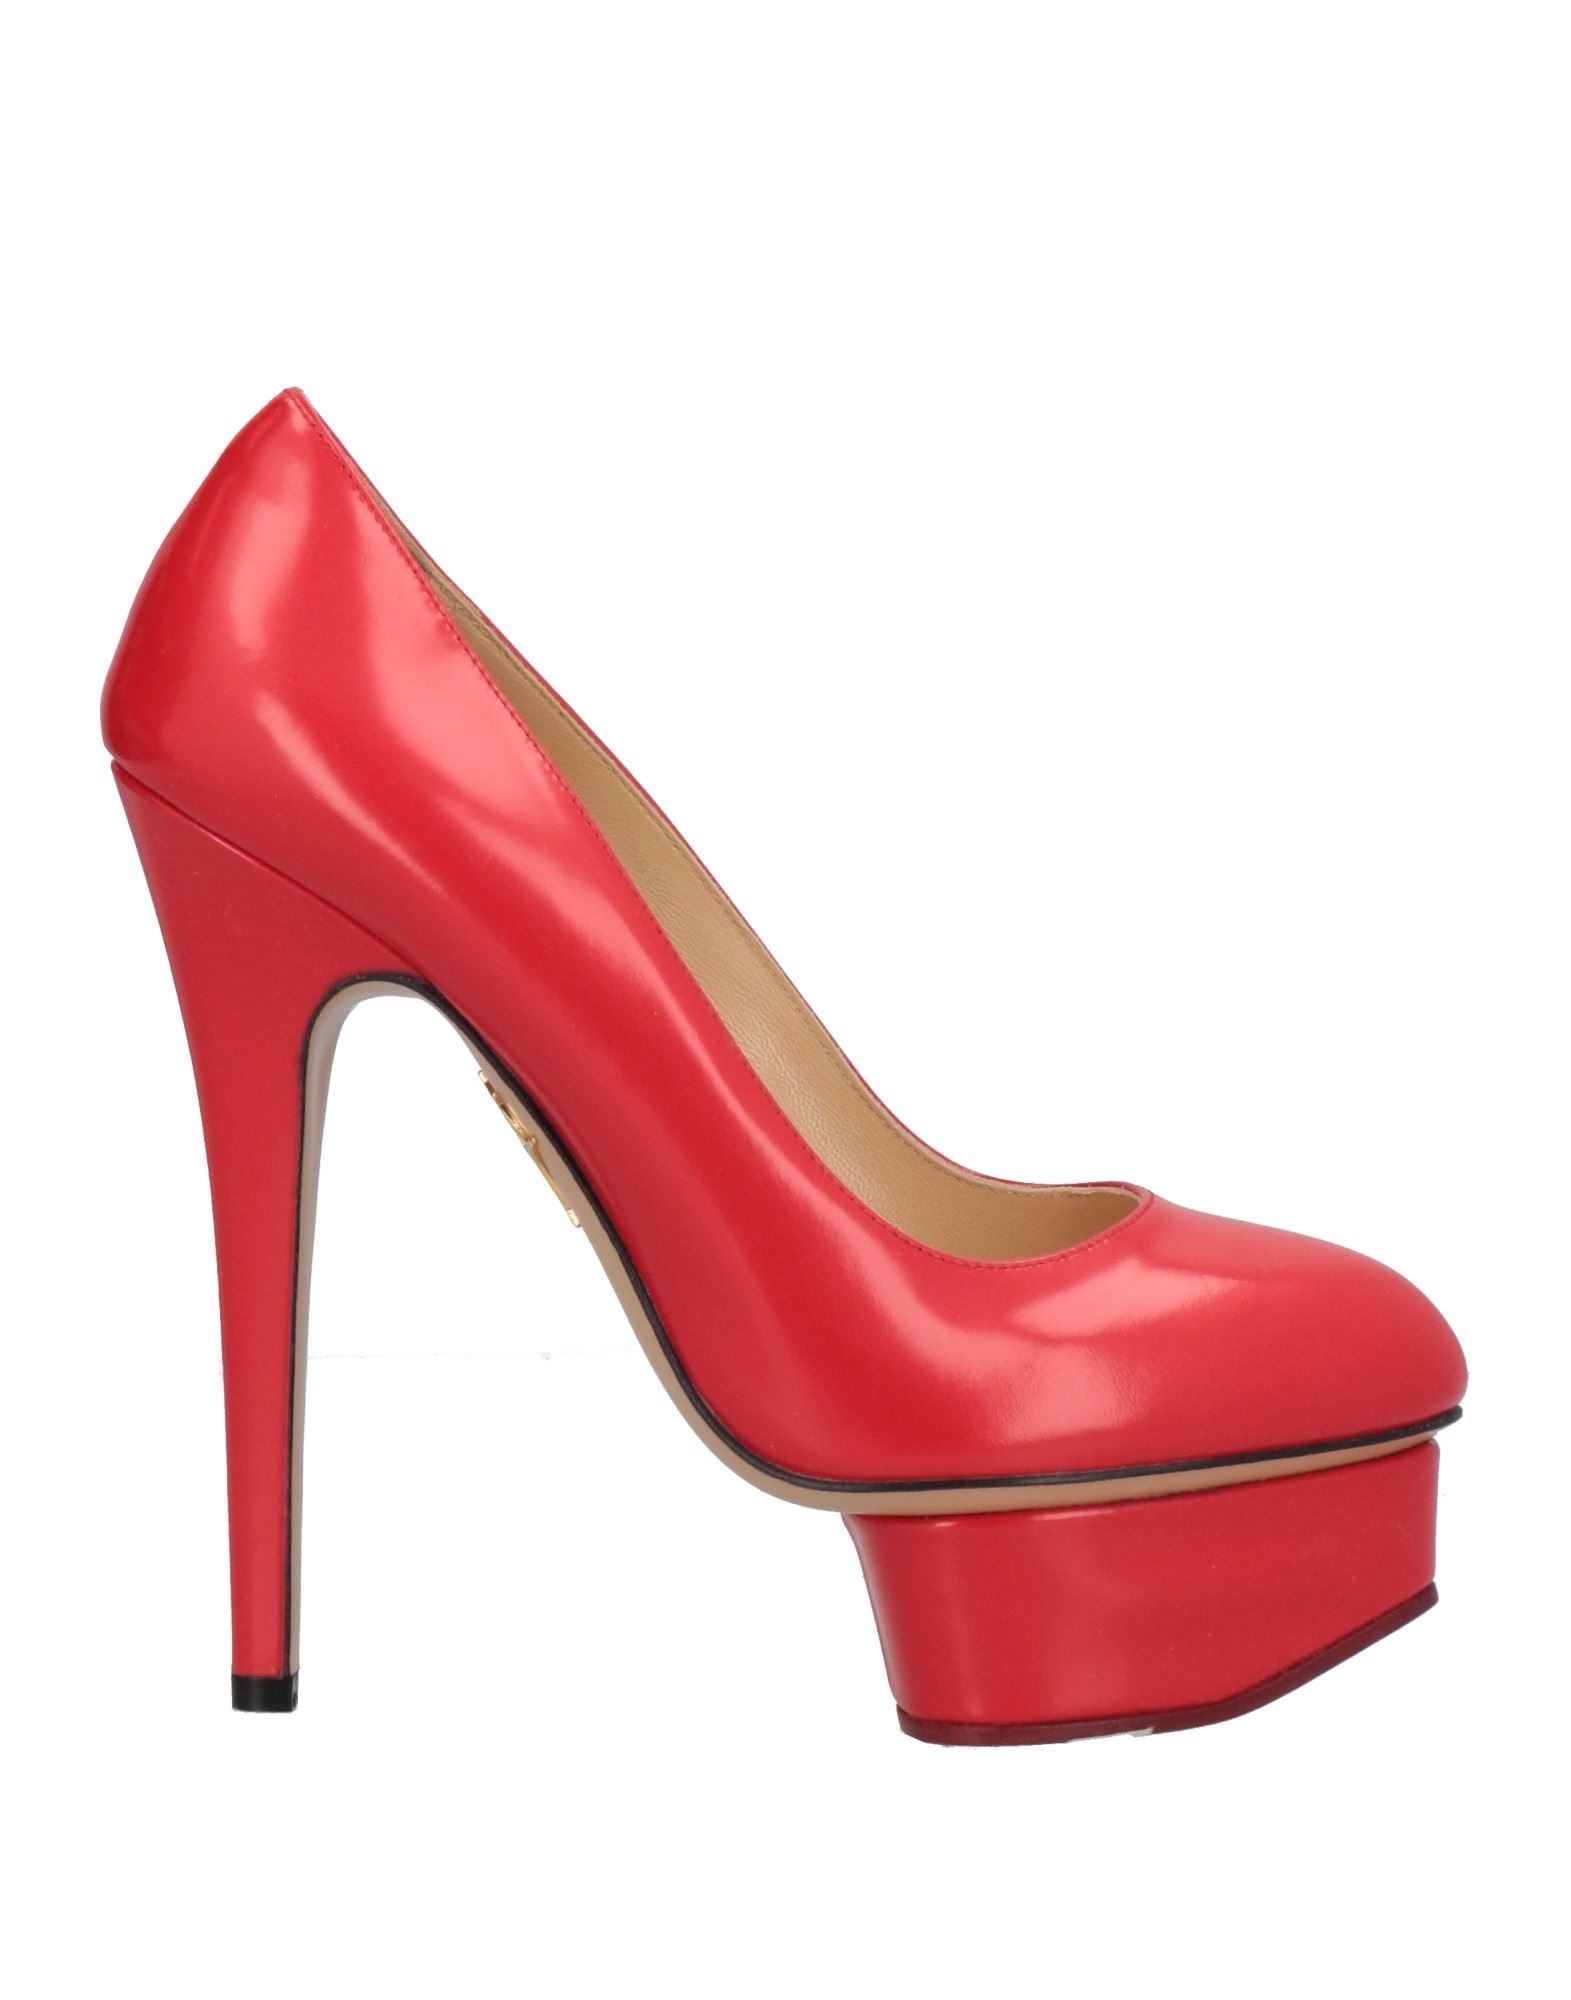 Charlotte Olympia Pumps In Tomato Red